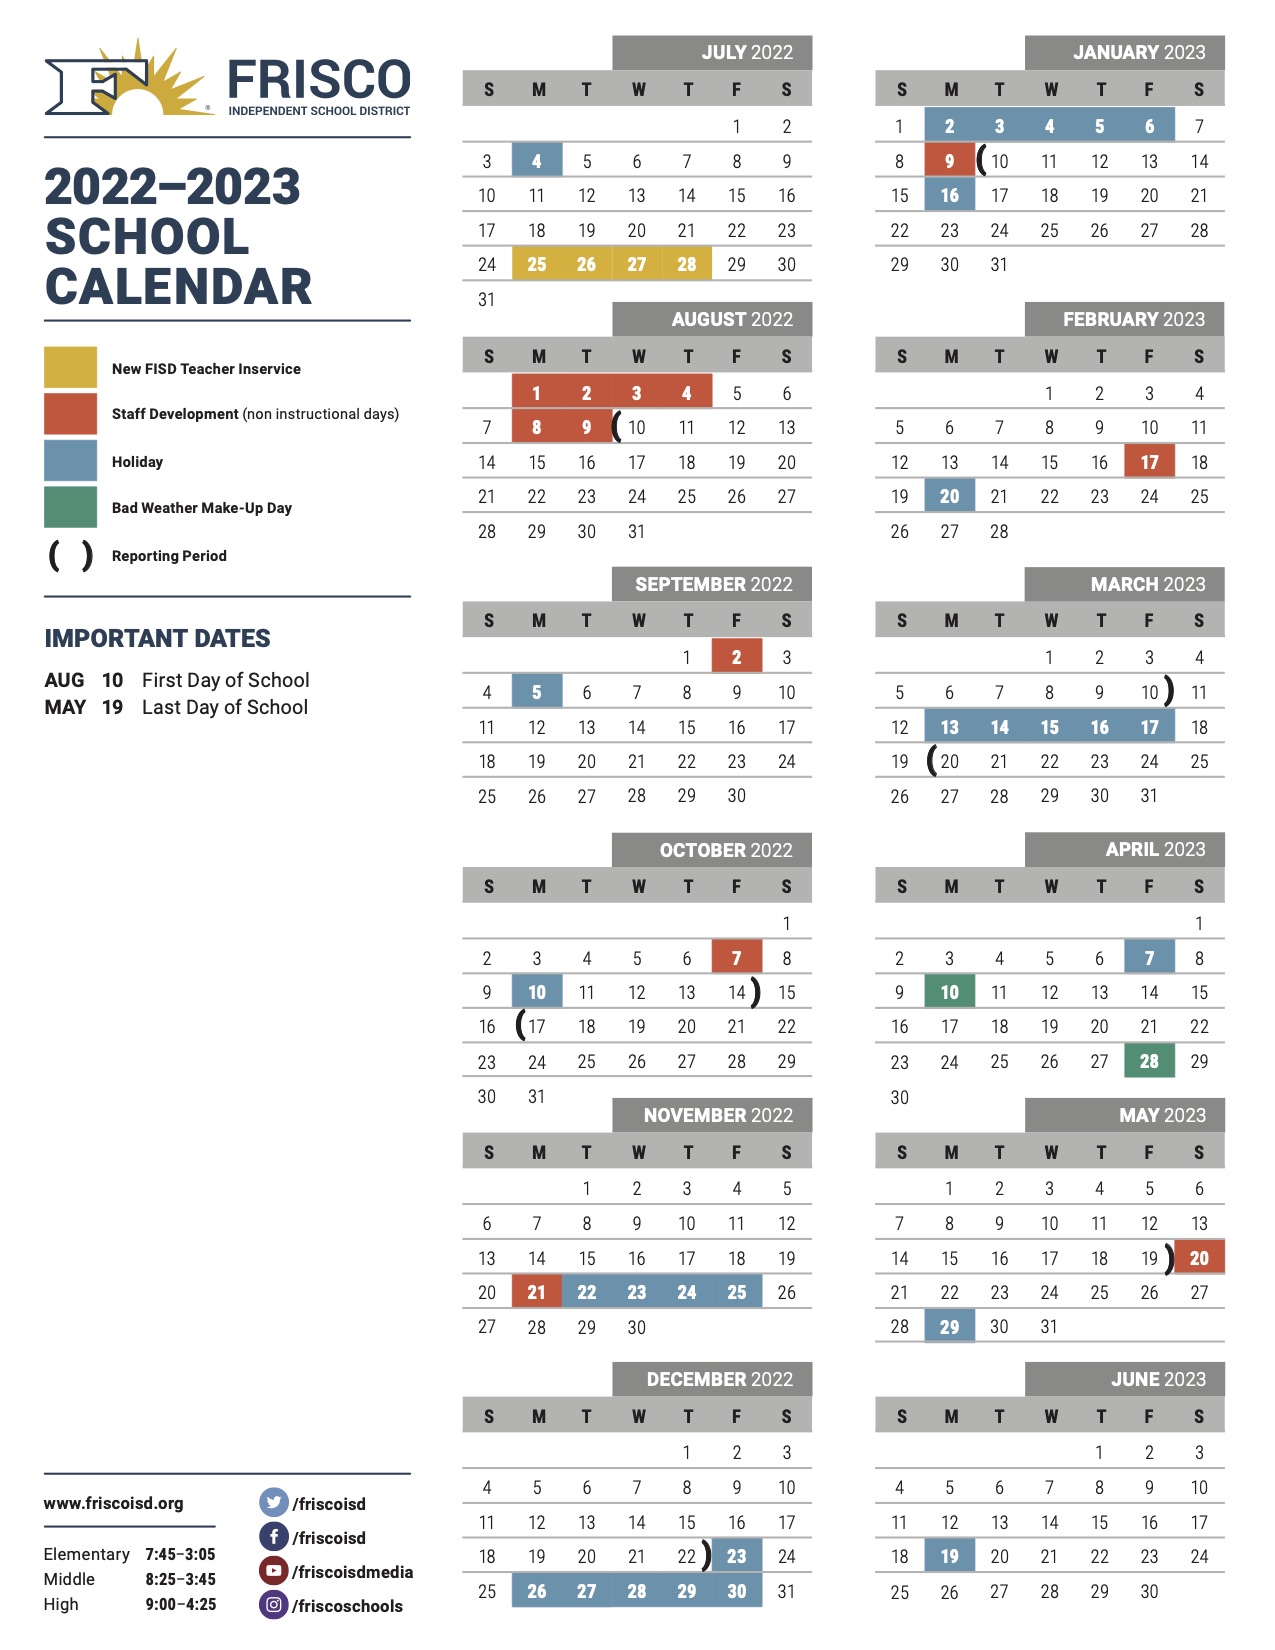 Frisco Isd 2022 Calendar Frisco Isd On Twitter: "The Frisco Isd Academic Calendar Has Been Approved  For The 2022-23 School Year. Check Out Https://T.co/Jlvoekeccp For An  Overview Of The Calendar. Https://T.co/C8Gs8Lflru" / Twitter